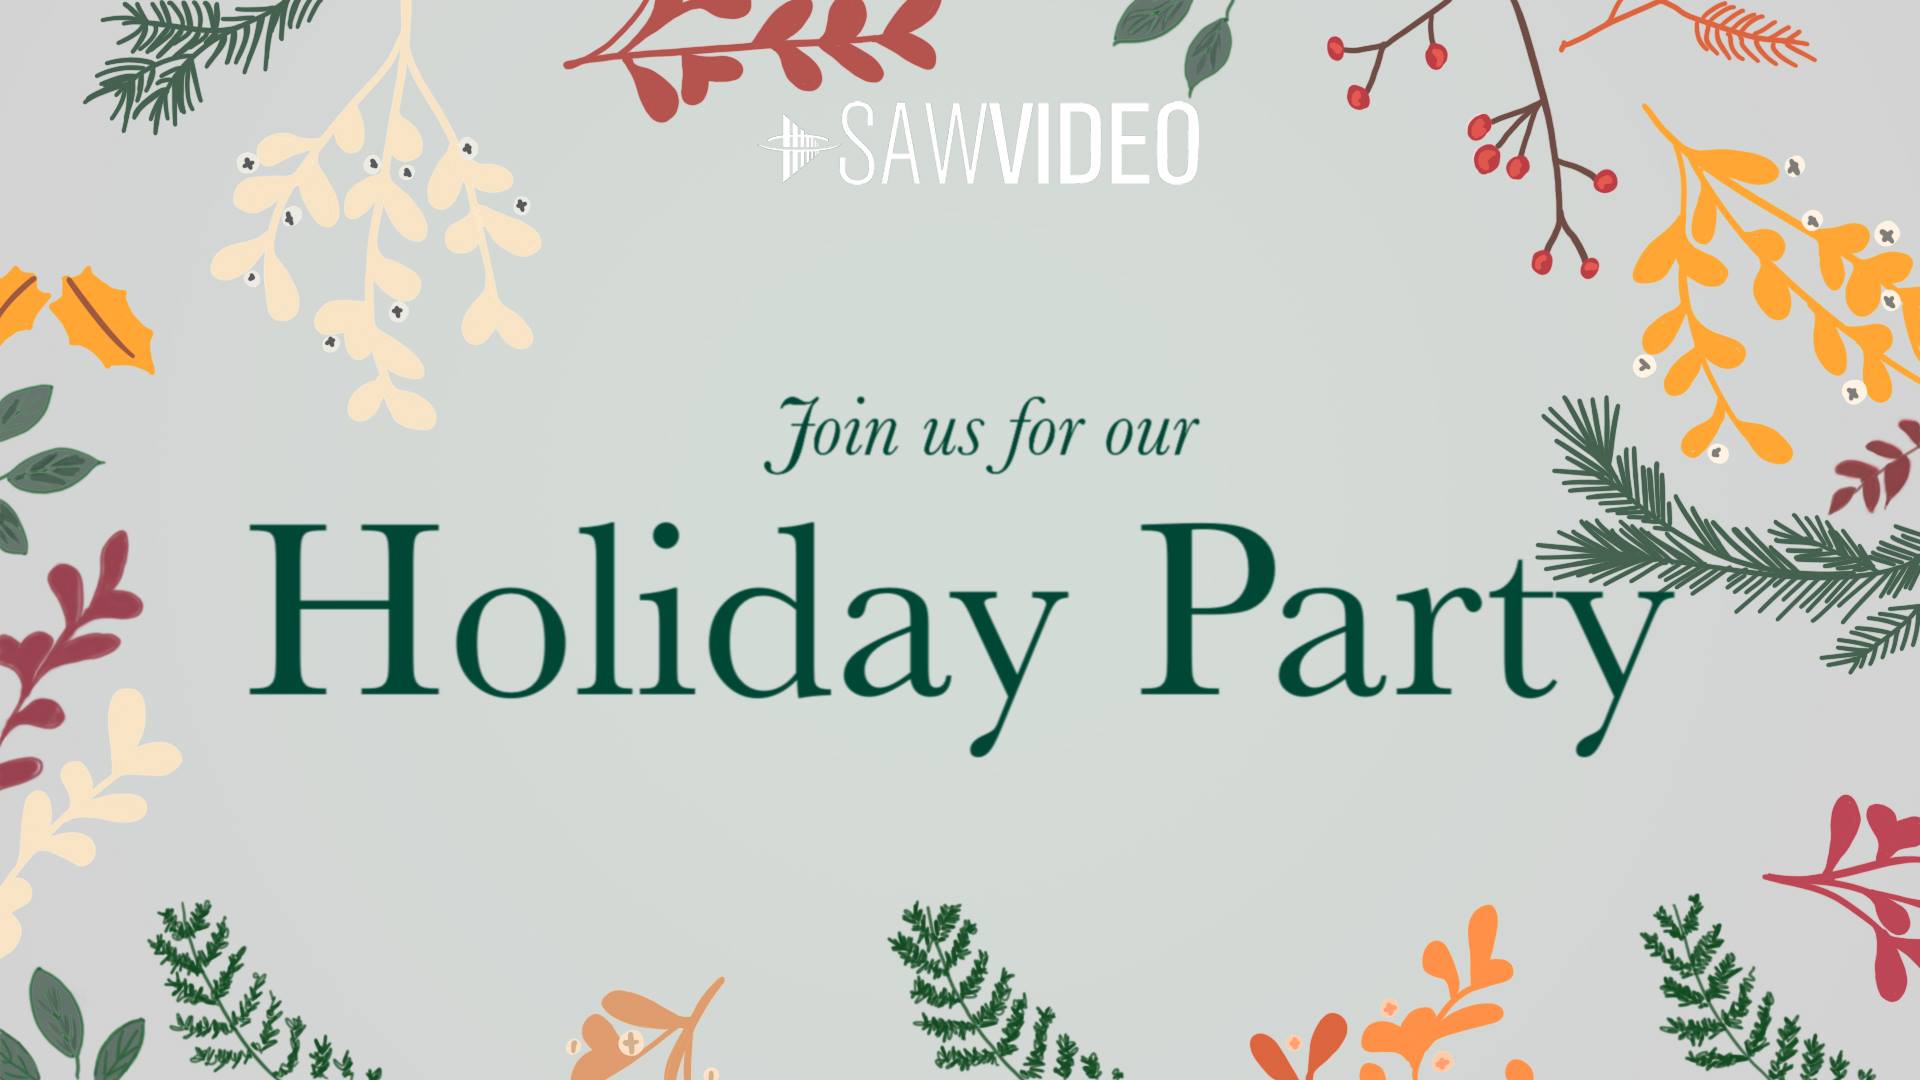 Join us for SAW Video's Holiday Party (image with festive evergreen and holly branches)